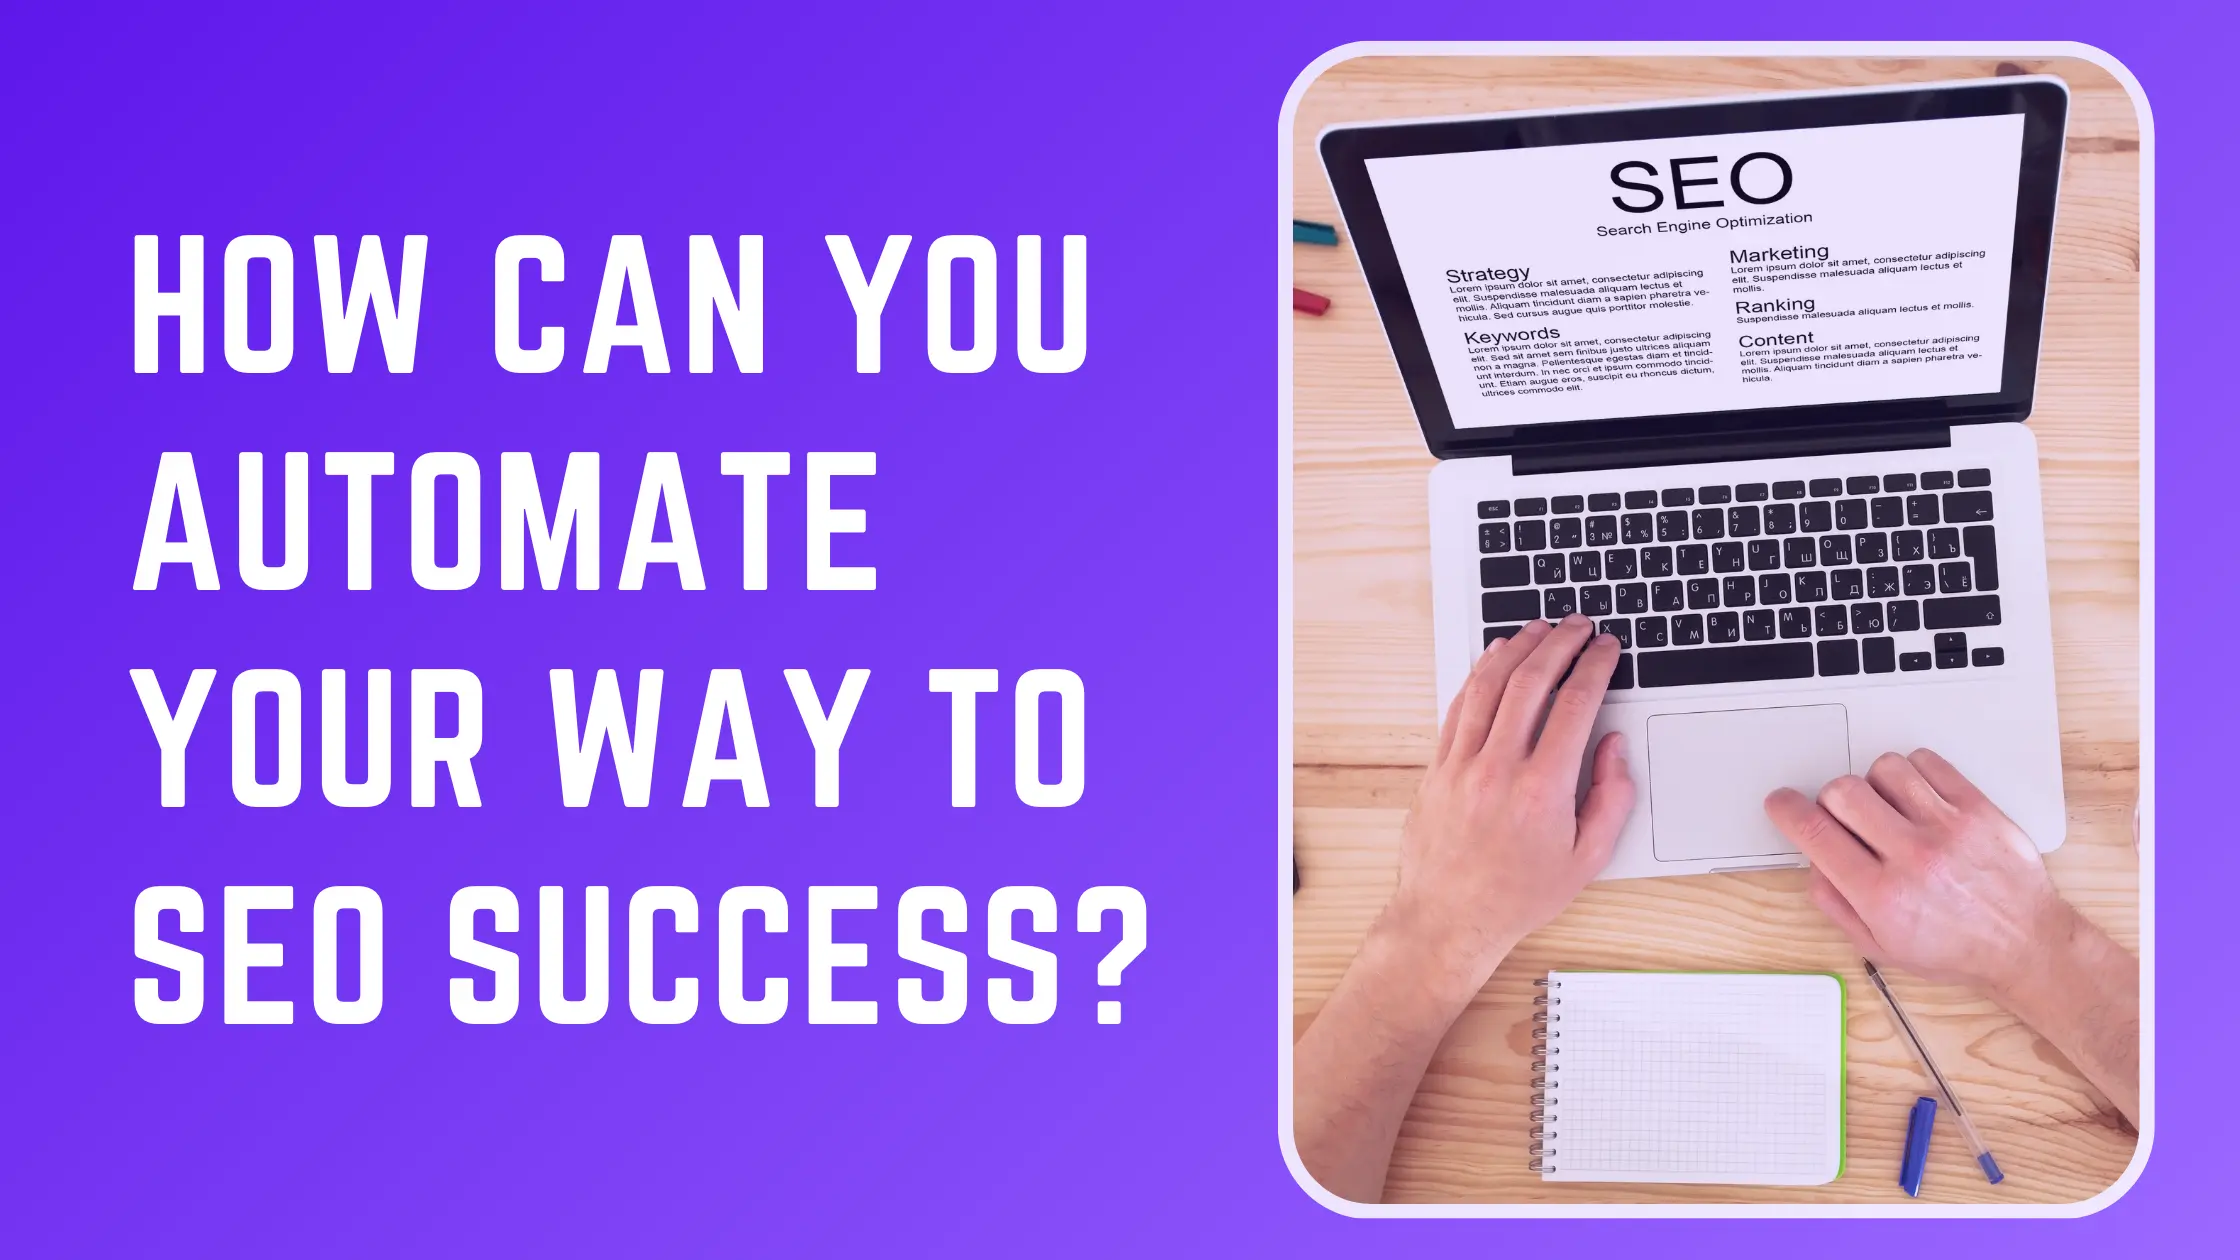 How Can You Automate Your Way to SEO Success